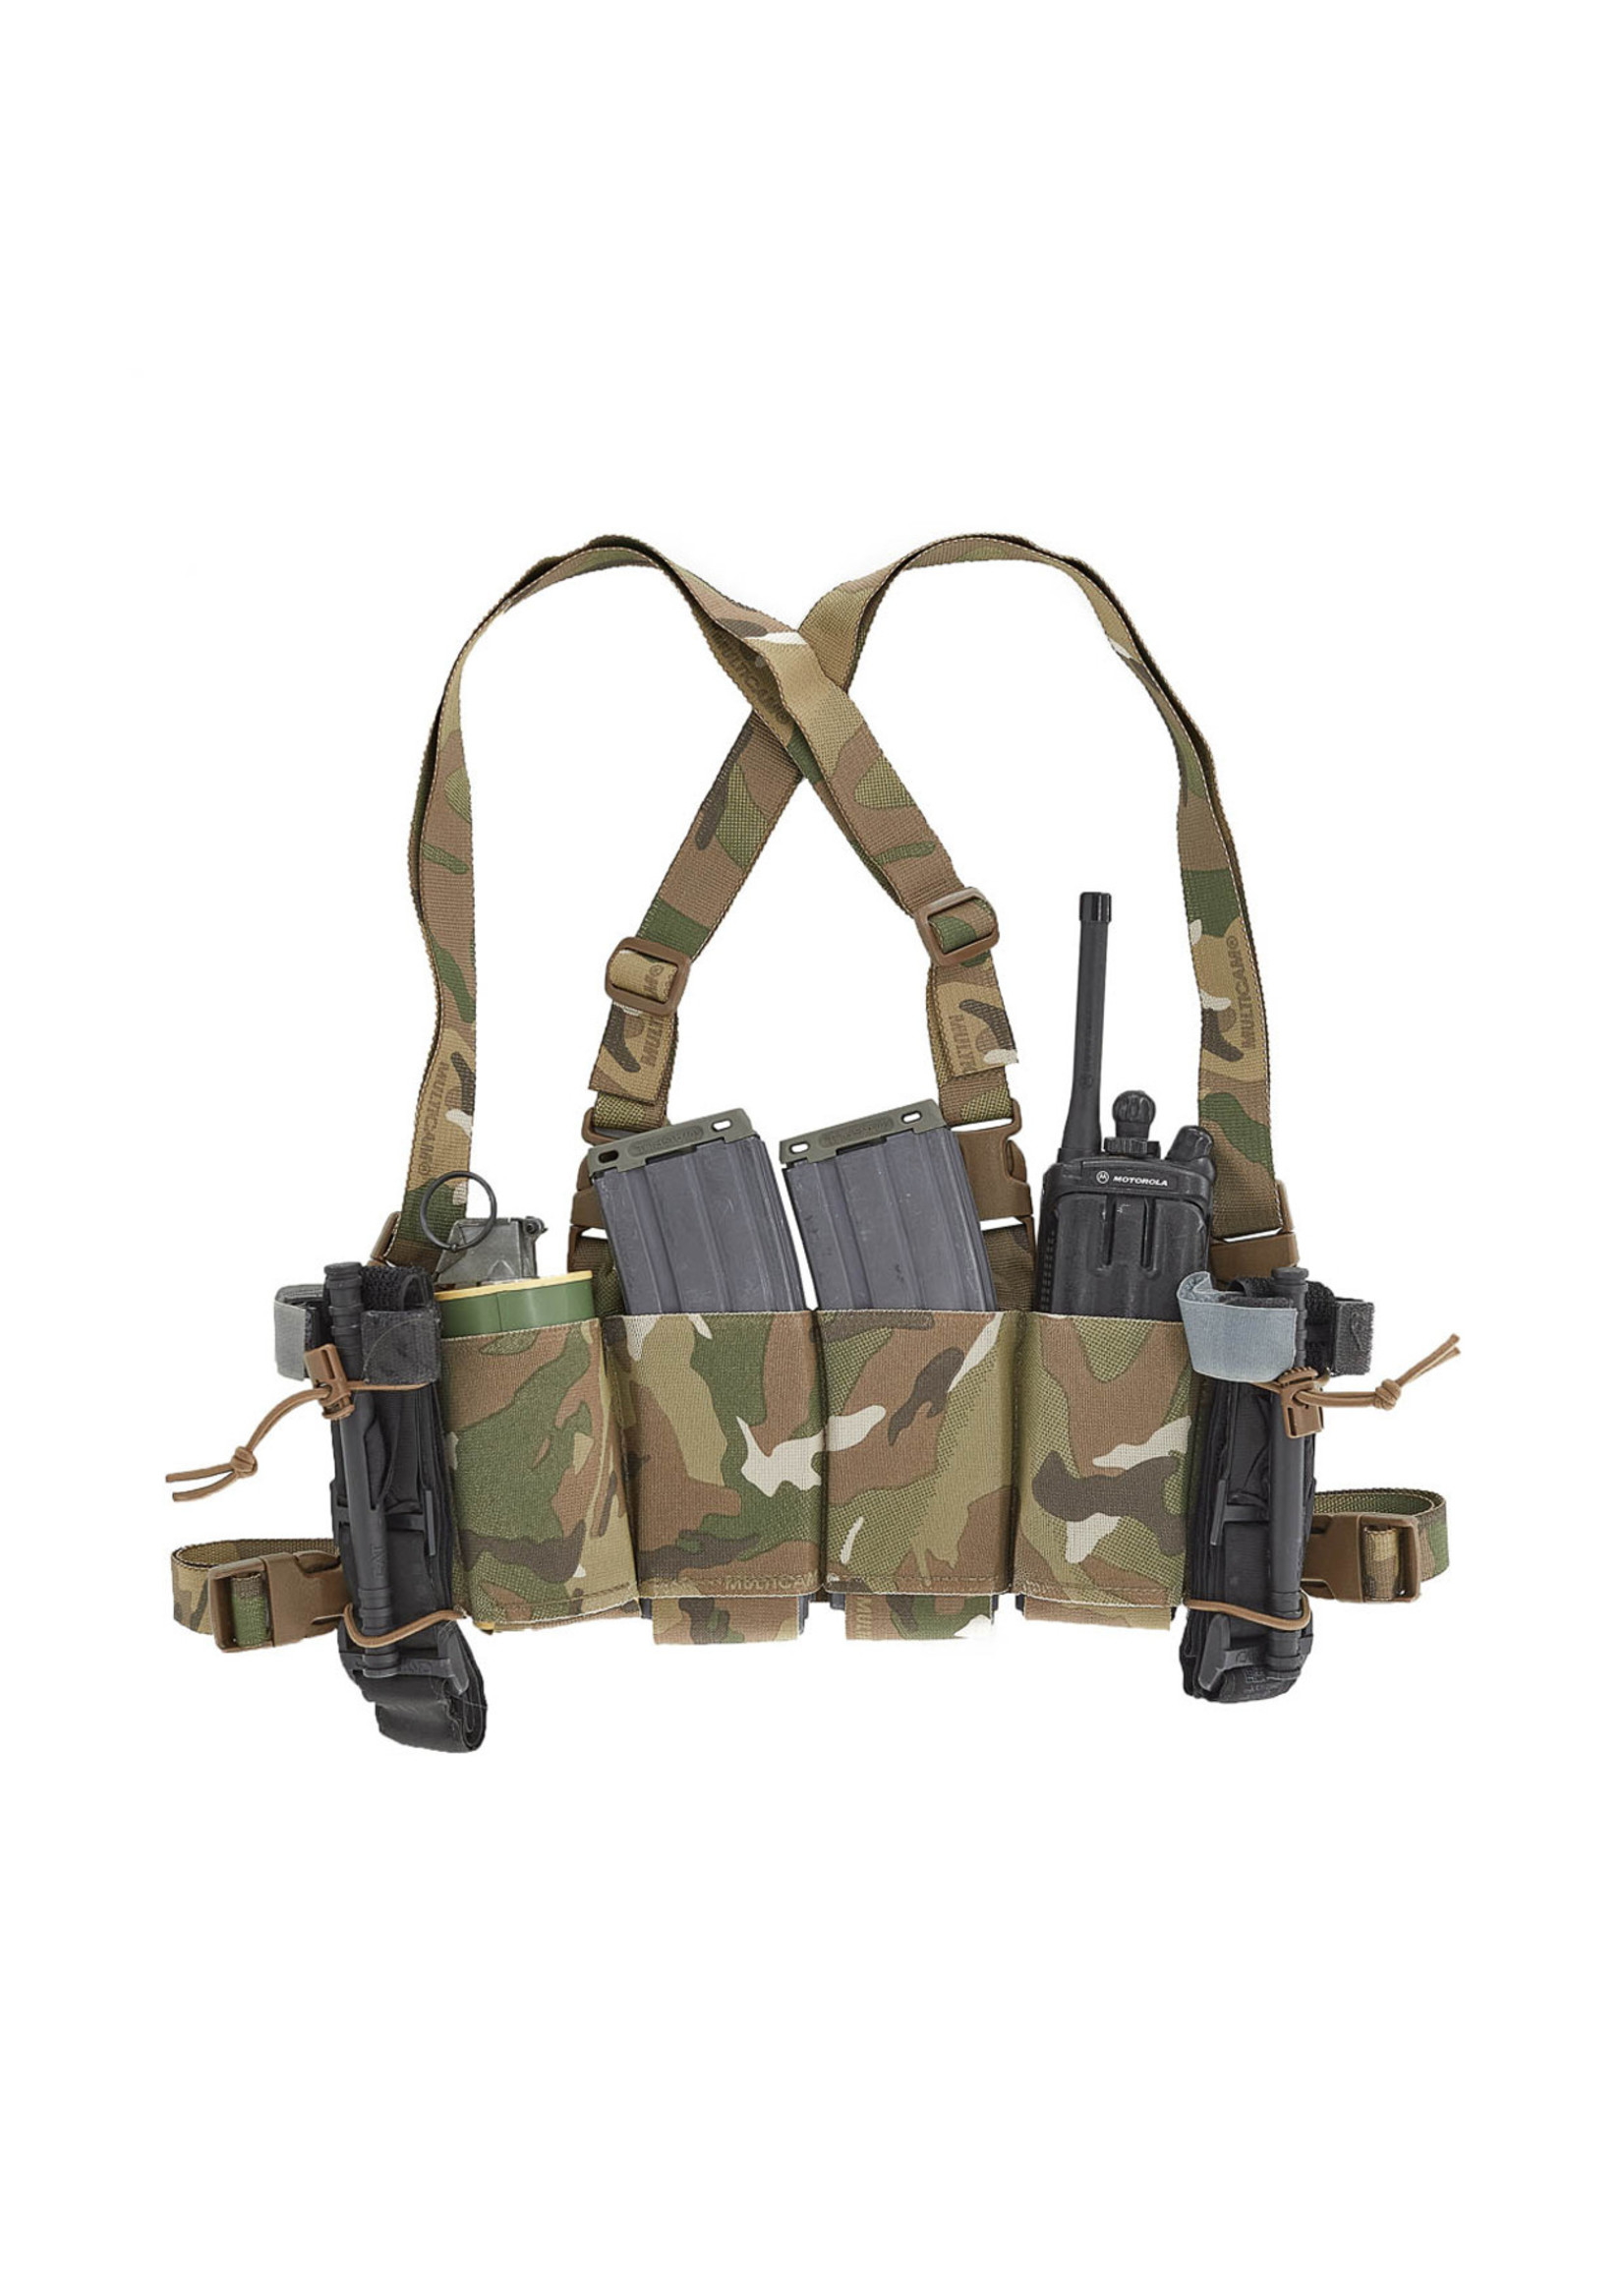 SPIRITUS SYSTEMS BANK ROBBER CHEST RIG